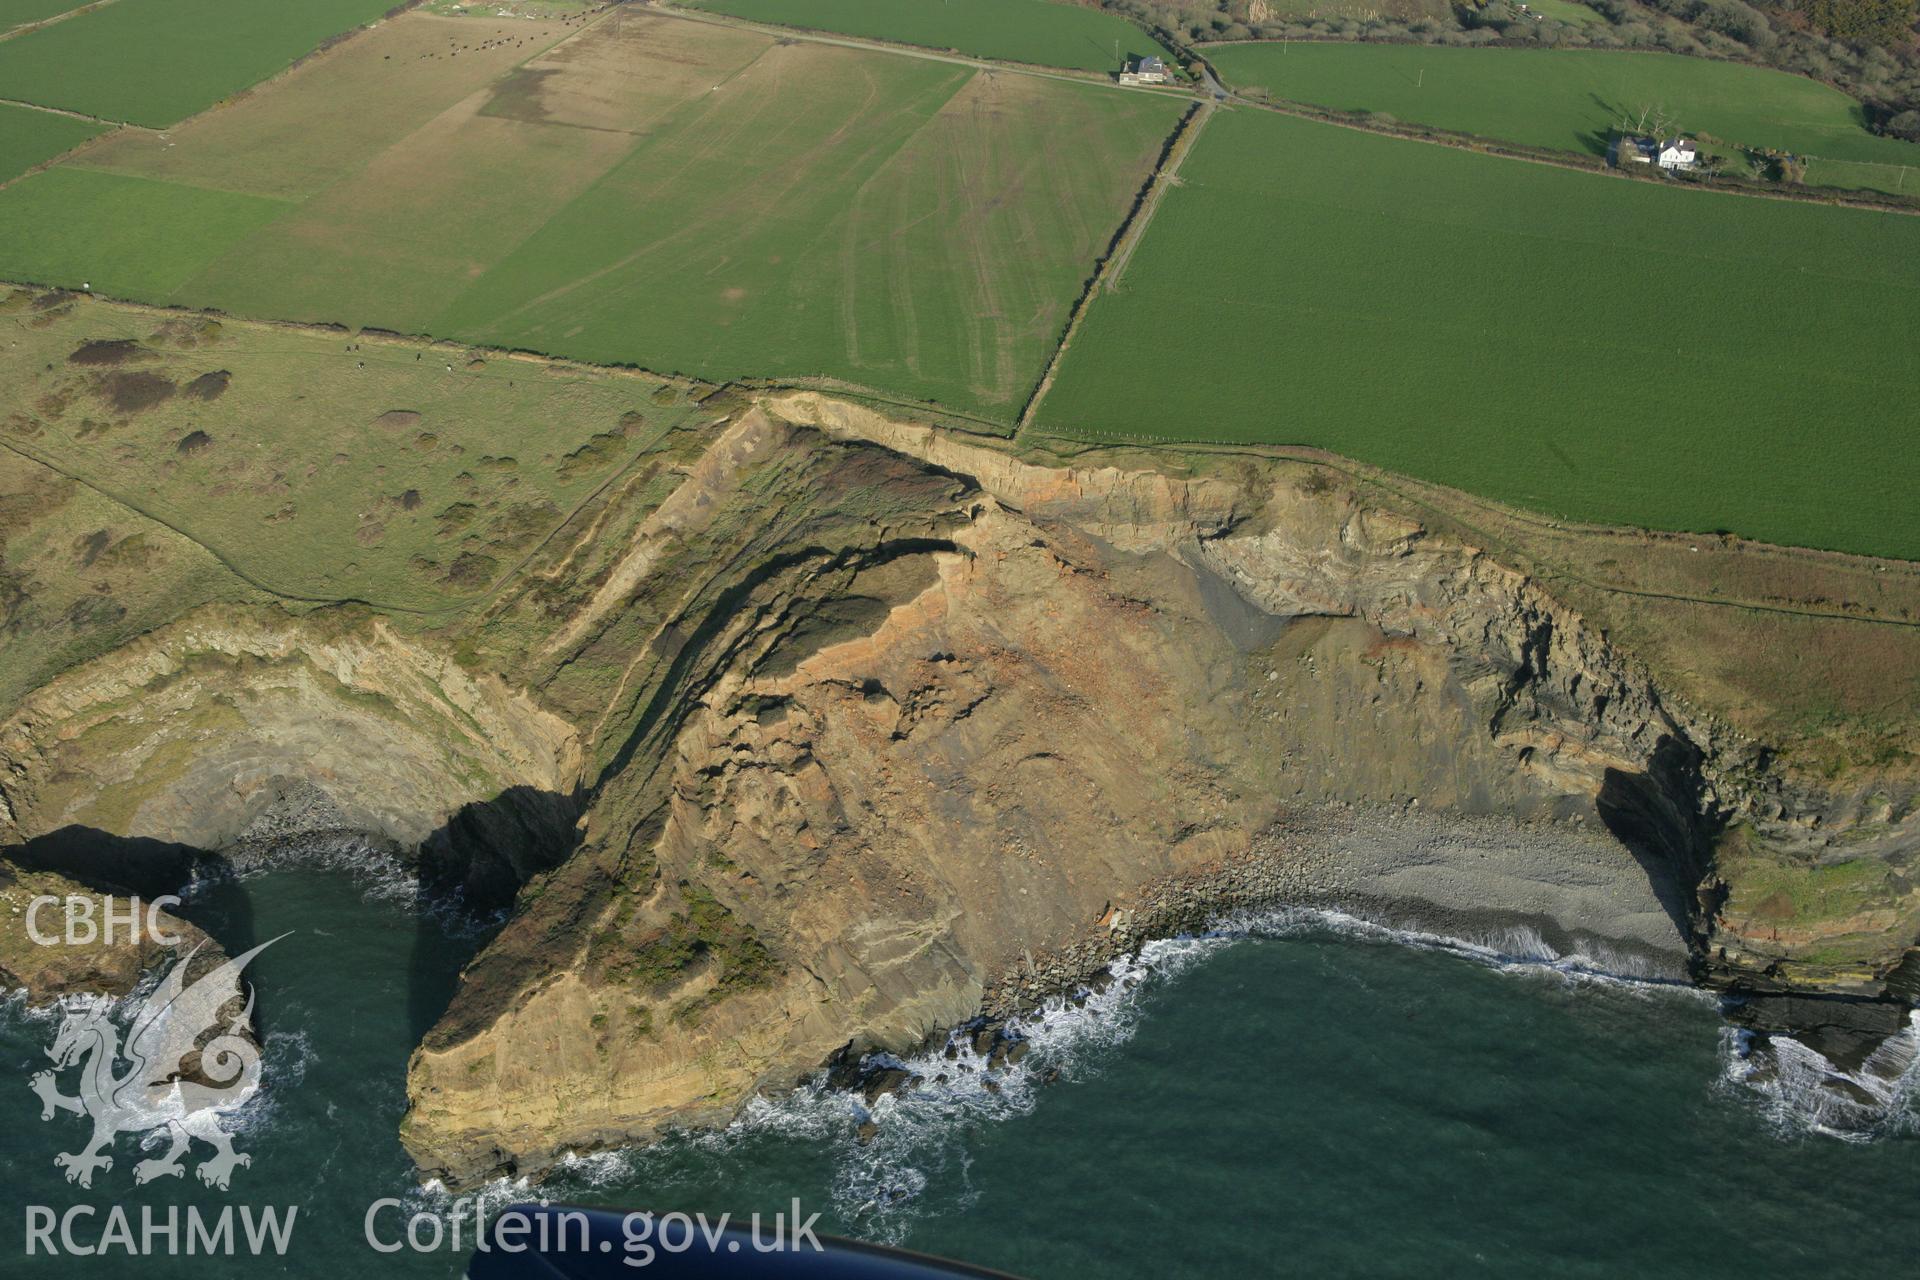 RCAHMW colour oblique photograph of Black Point Rath, promontory fort. Taken by Toby Driver on 04/03/2008.